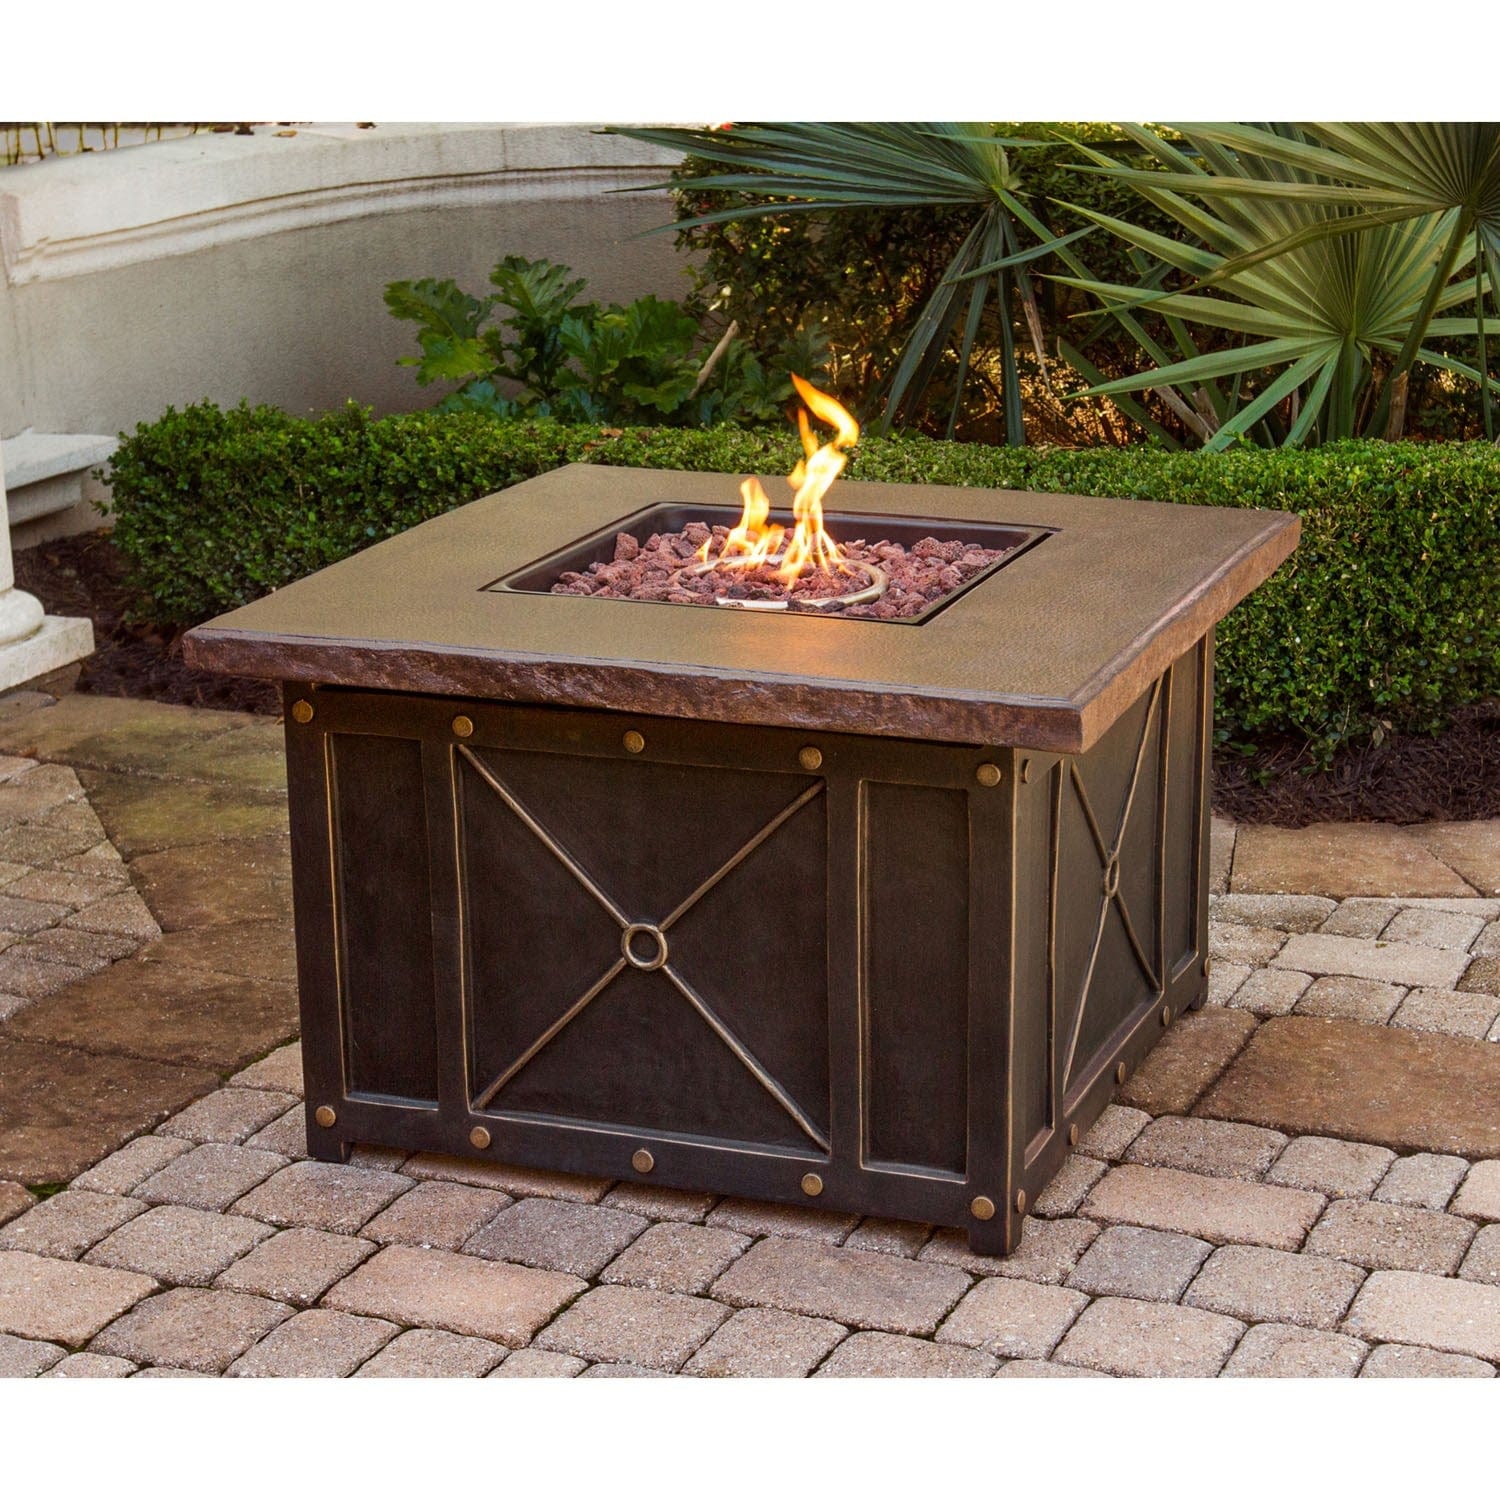 Hanover Fire Pit Dining Set Hanover Monaco 5-Piece Fire Pit Chat Set with 4 Sling Dining Chairs and a 40,000 BTU Durastone Propane Fire Pit Coffee Table - MON5PCDFP